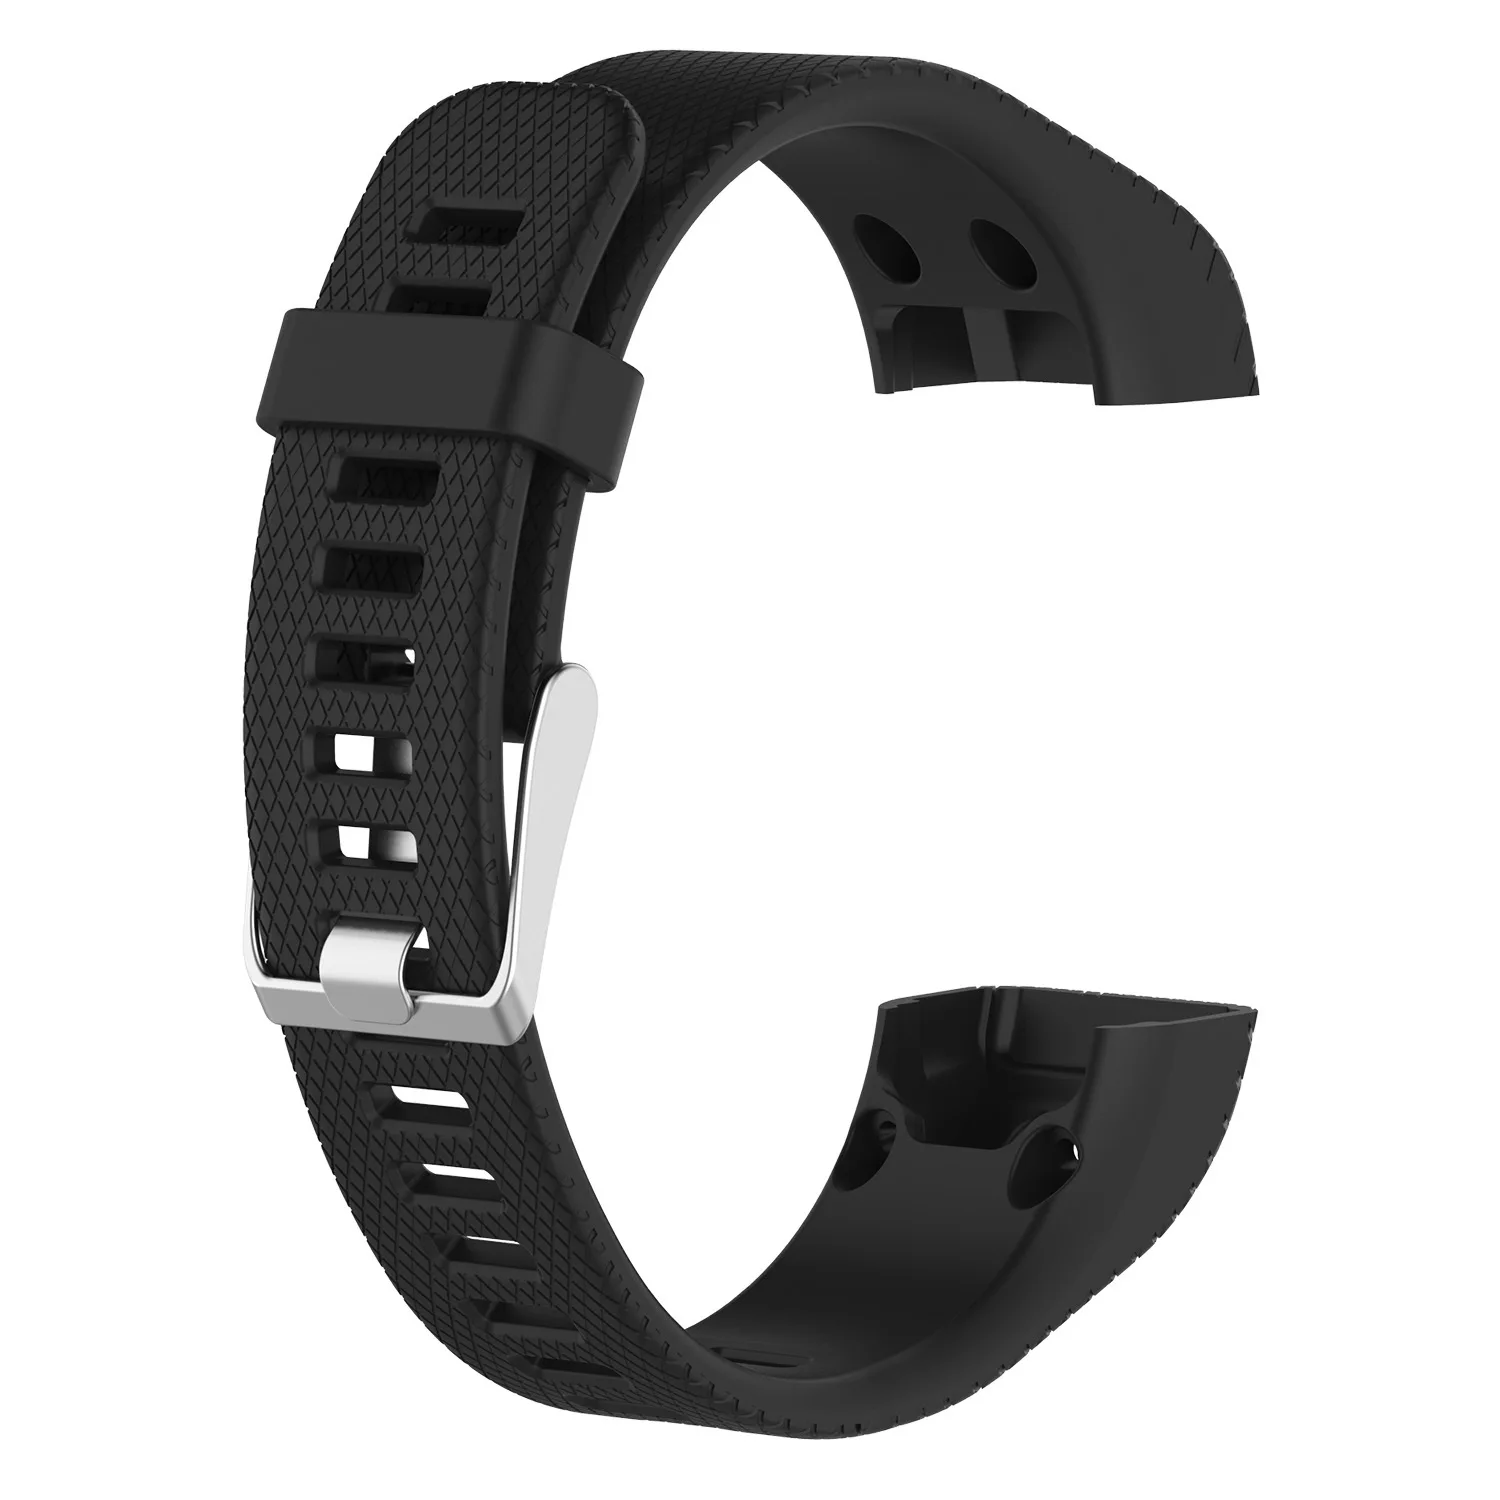 

Colorful Breathable Silicone Replacement Strap for Garmin Vivosmart Hr+ Plus Smart Watch Band for Approach X10/X40 Wristband